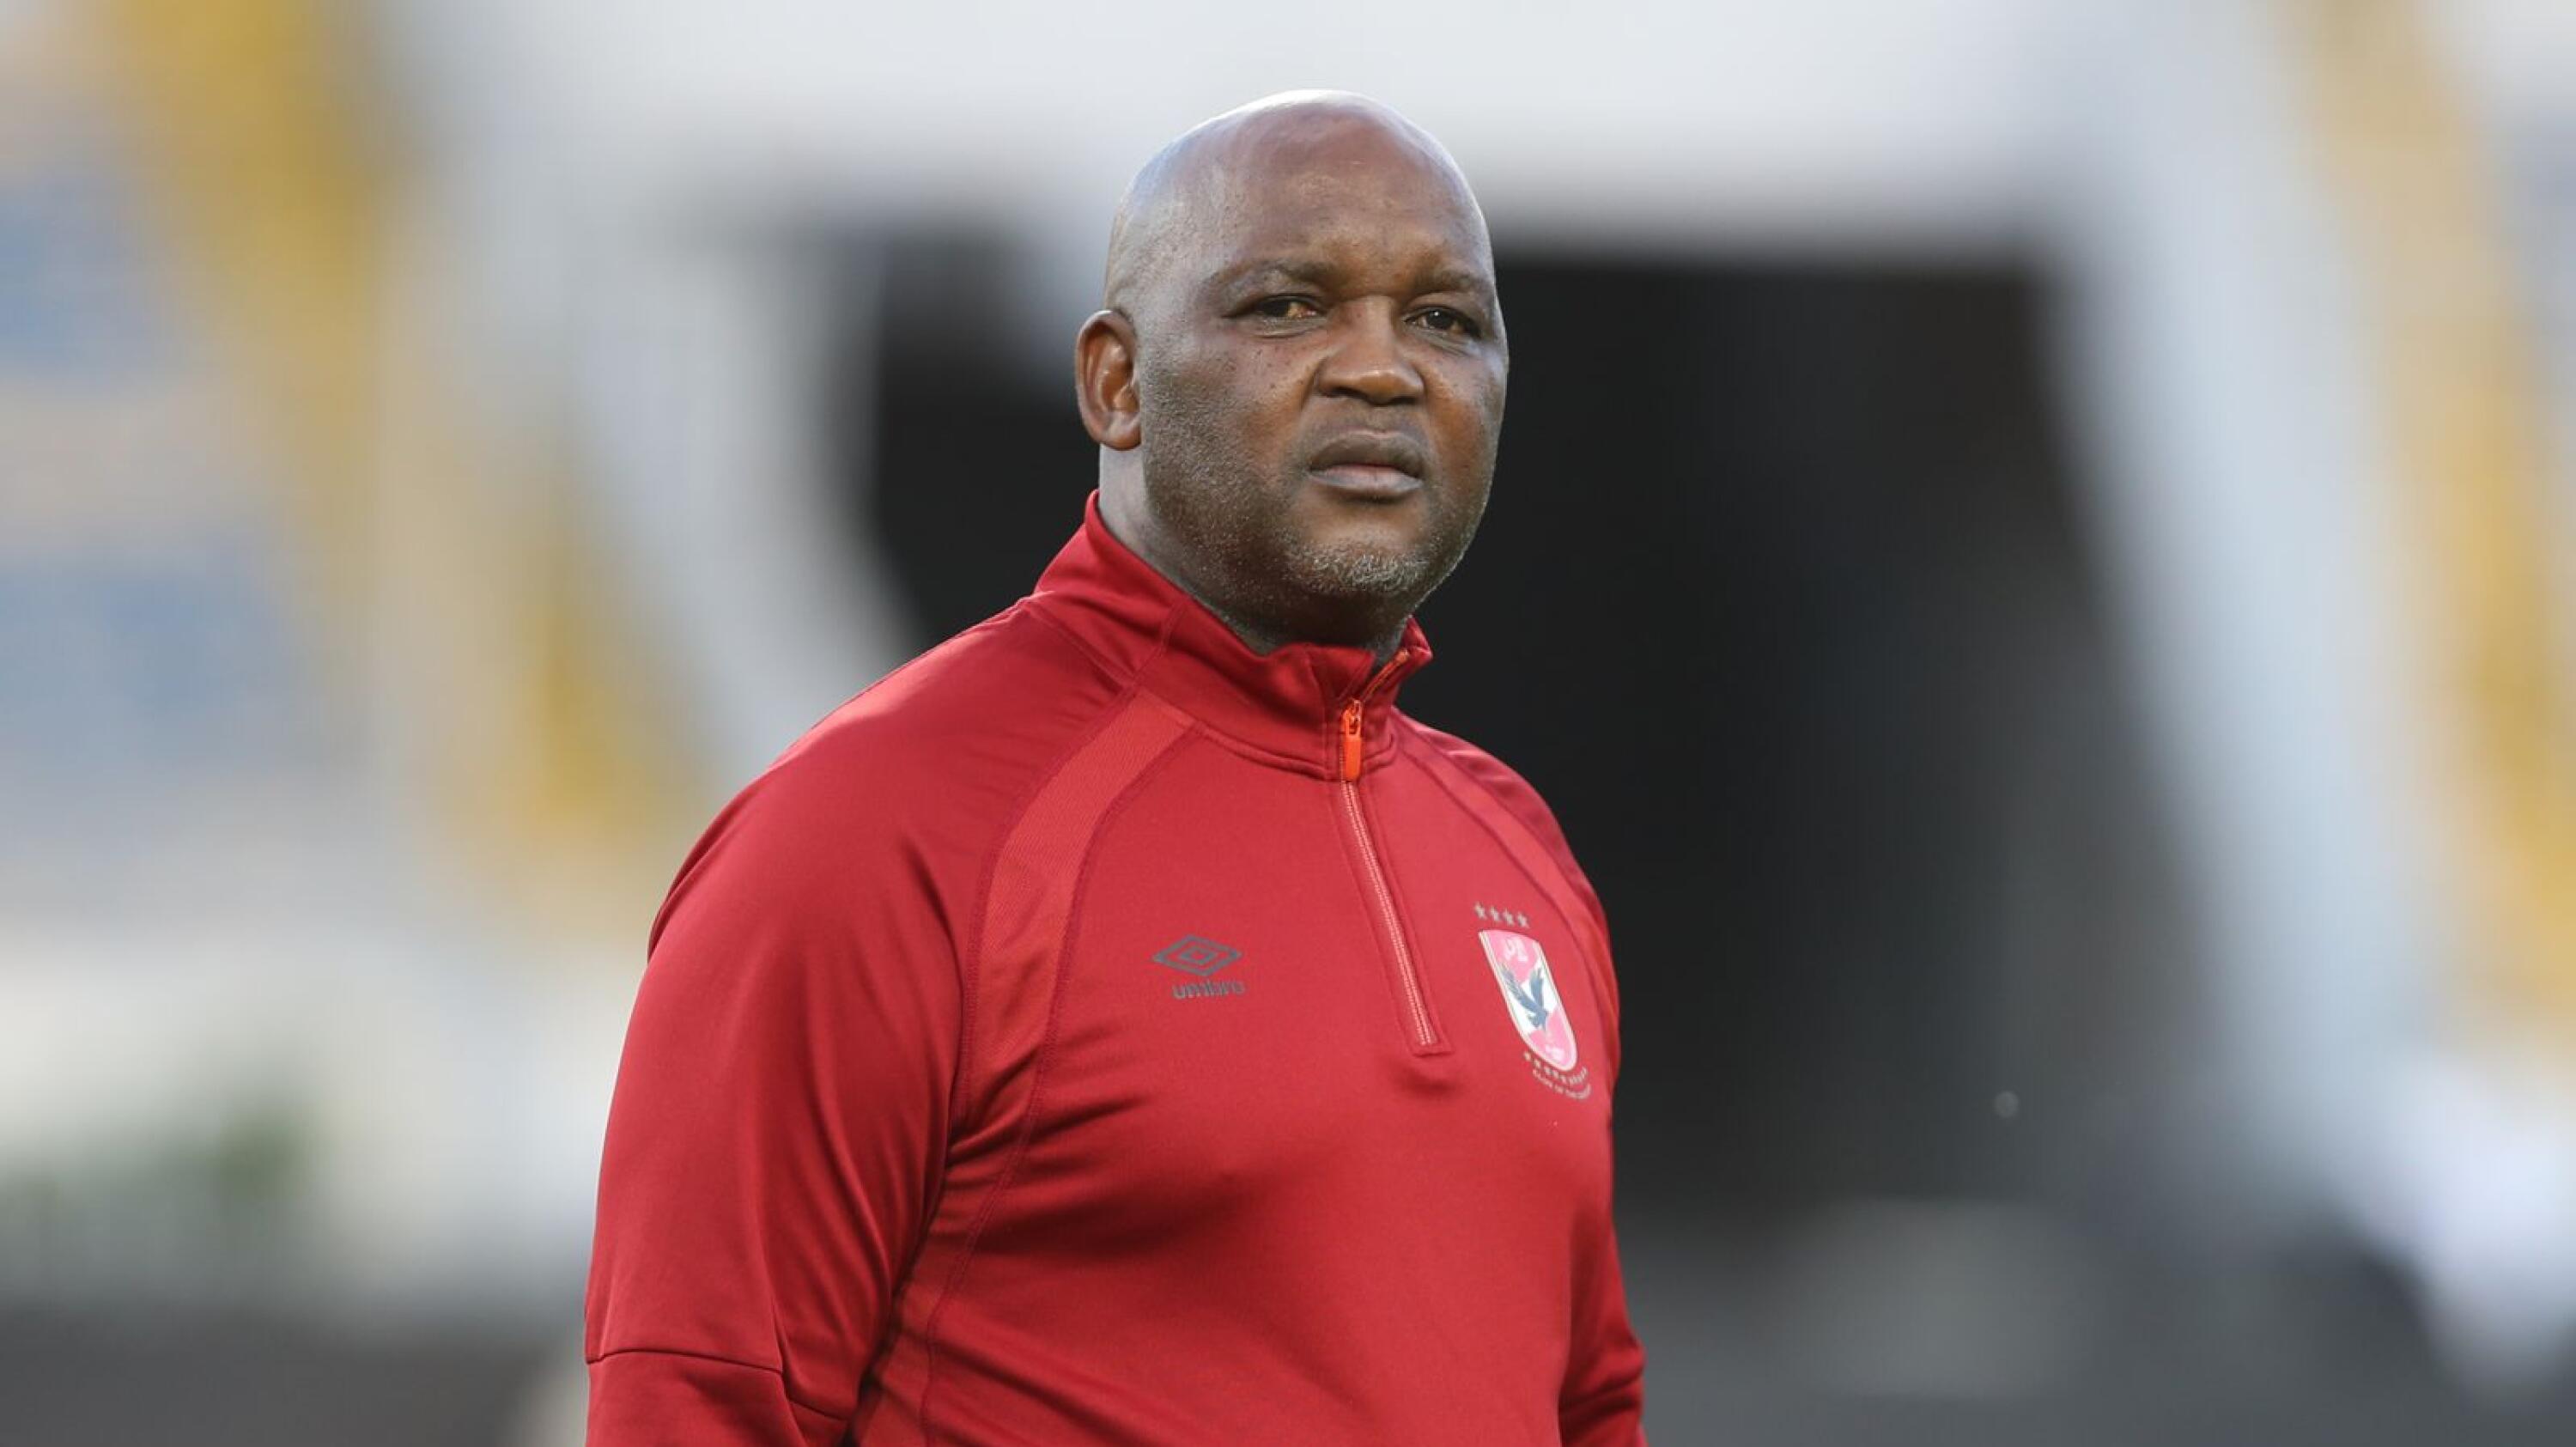 Al Ahly have announced that they’ve parted ways with head coach Pitso Mosimane after two years